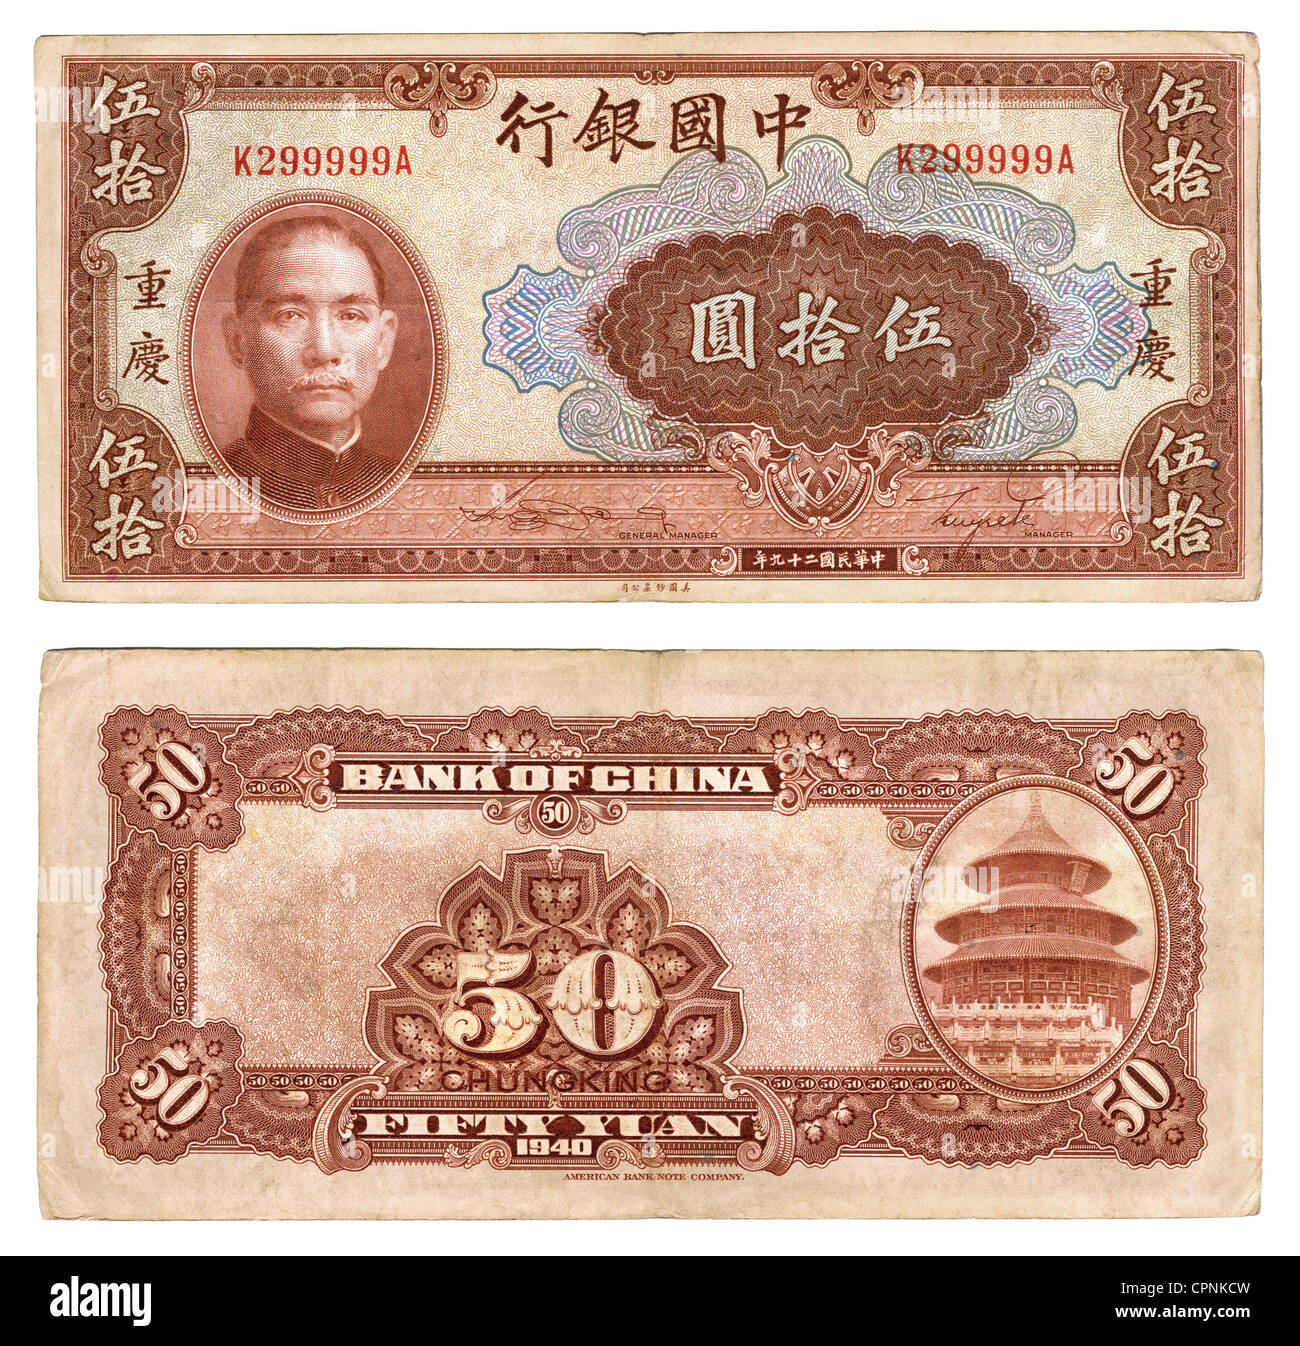 money / finances, banknote, China, 50 yuan banknote, obverse: portrait Sun Yat-sen (1866 - 1925), reverse: Temple of Heaven in Beijing, Bank of China, 1940, Additional-Rights-Clearences-Not Available Stock Photo